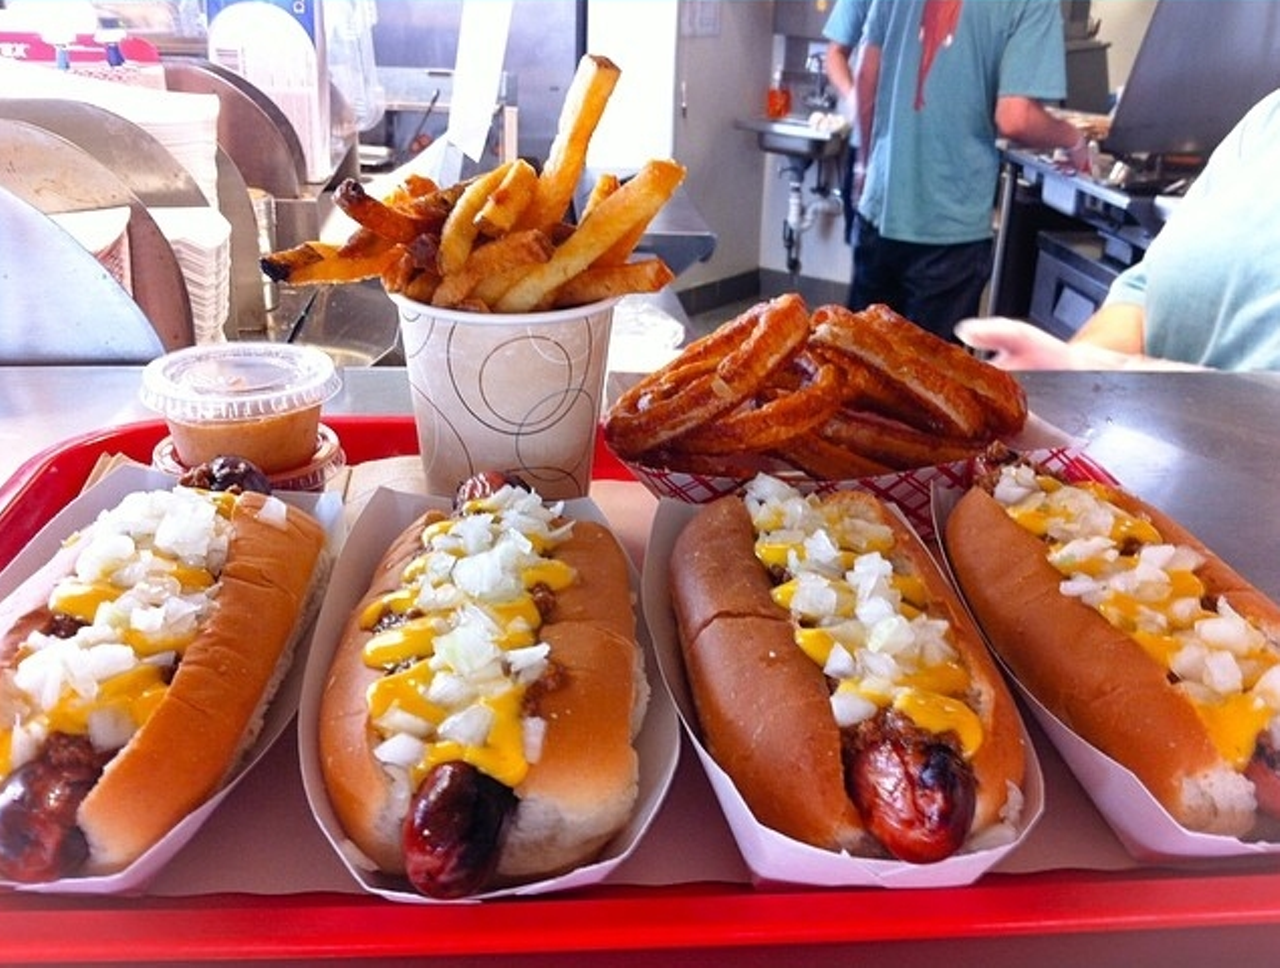 Where: Retro Dog - 350 E. Steels Corner, Cuyahoga Falls
Challenge: Finish nine hot dogs, two burgers, fries, onions rings, a root beer, and a retro-bomb (combo sundae and milkshake).
Prize: A t-shirt and the meal is free.
Cost: Approx. $60